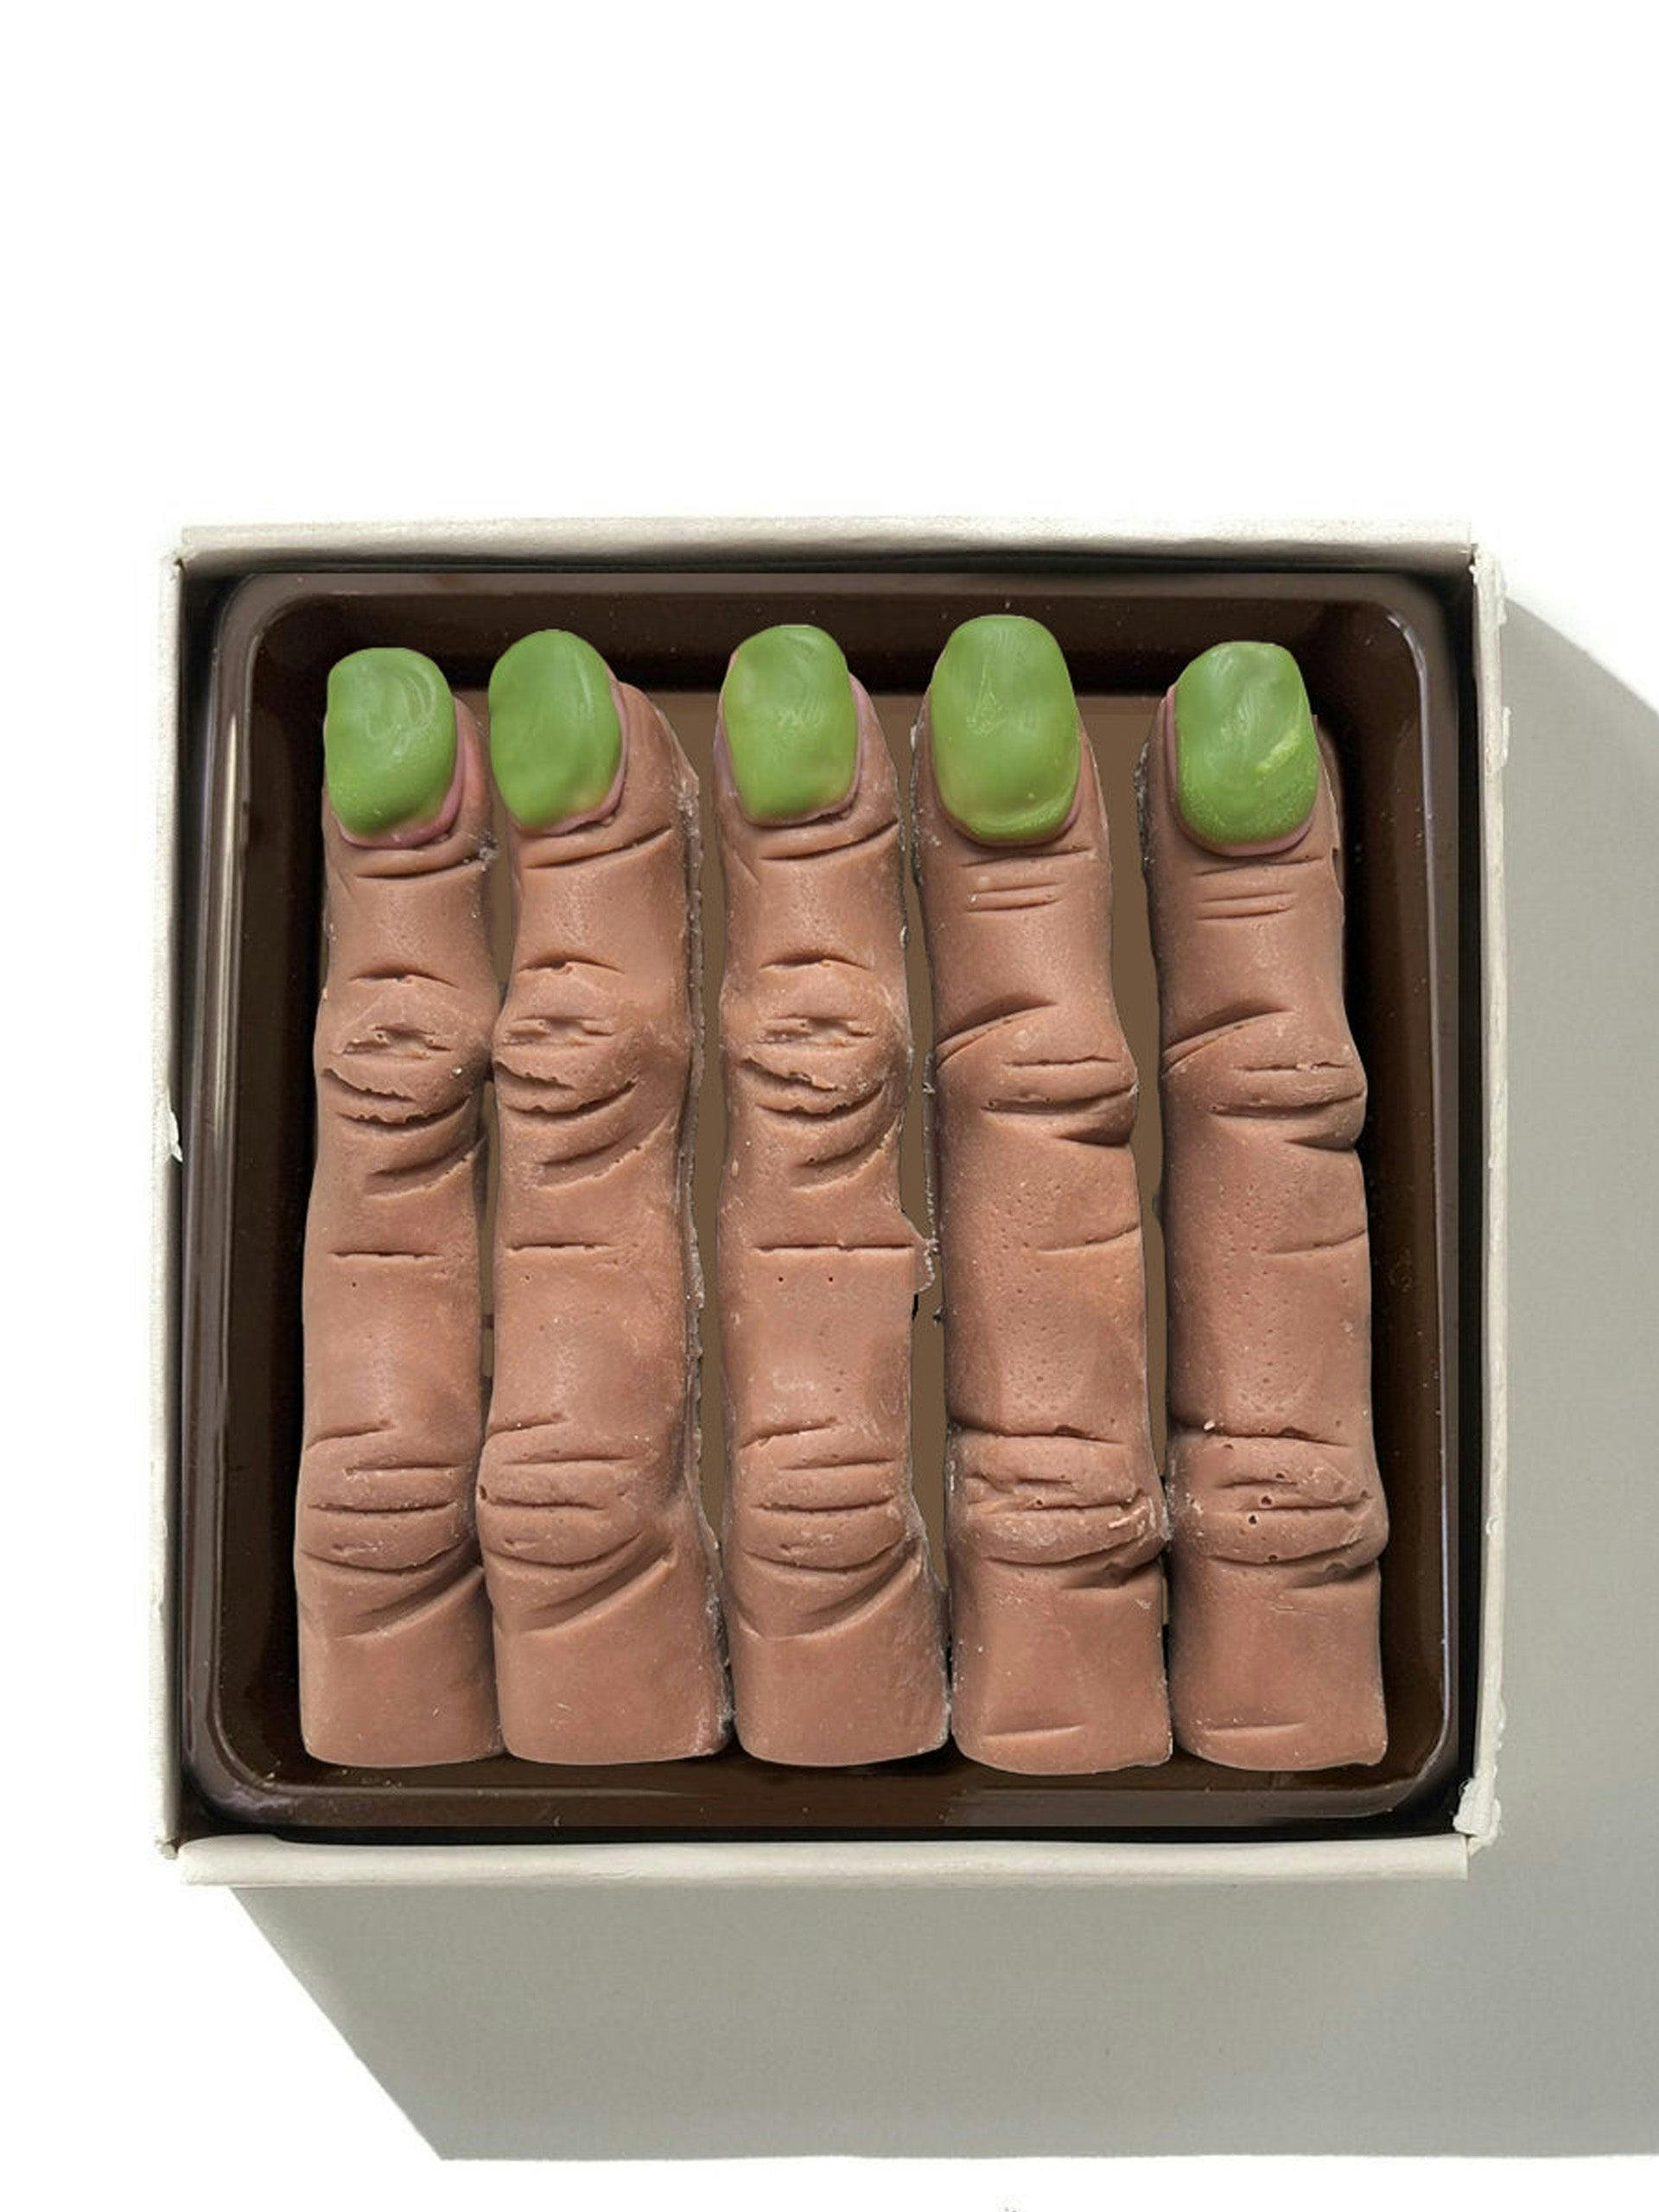 Spooky witches’ fingers chocolates